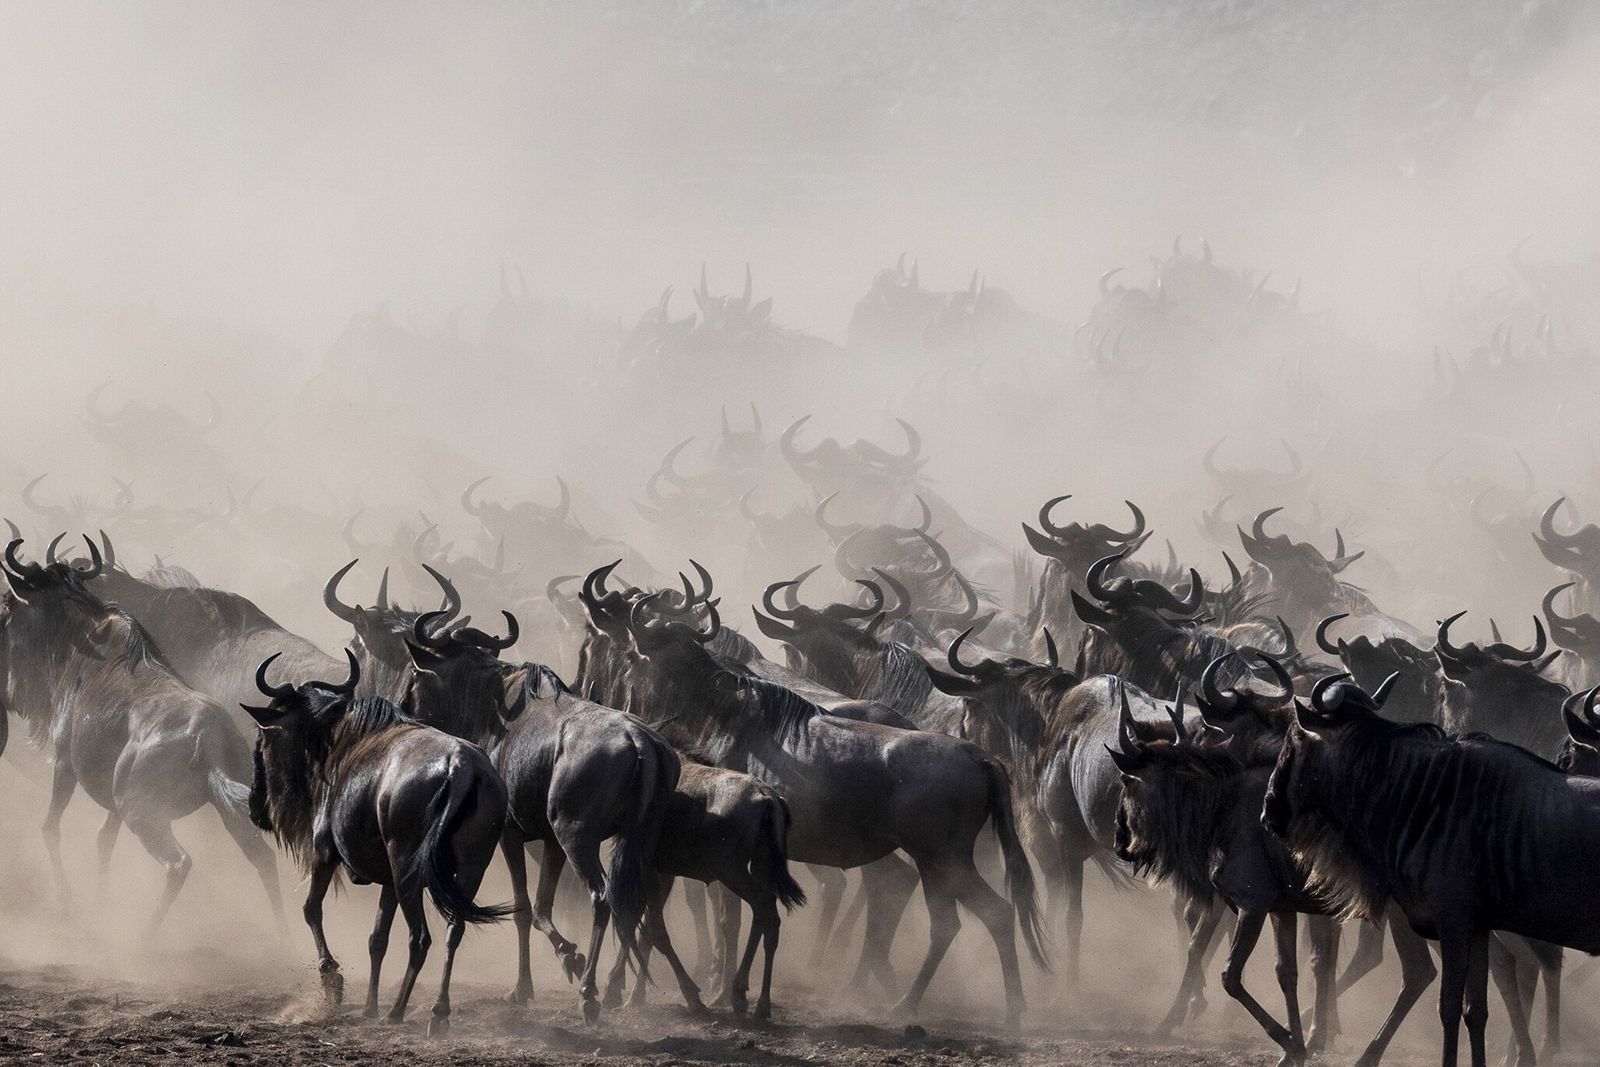 Wildebeests migrating to northern woodlands while storming